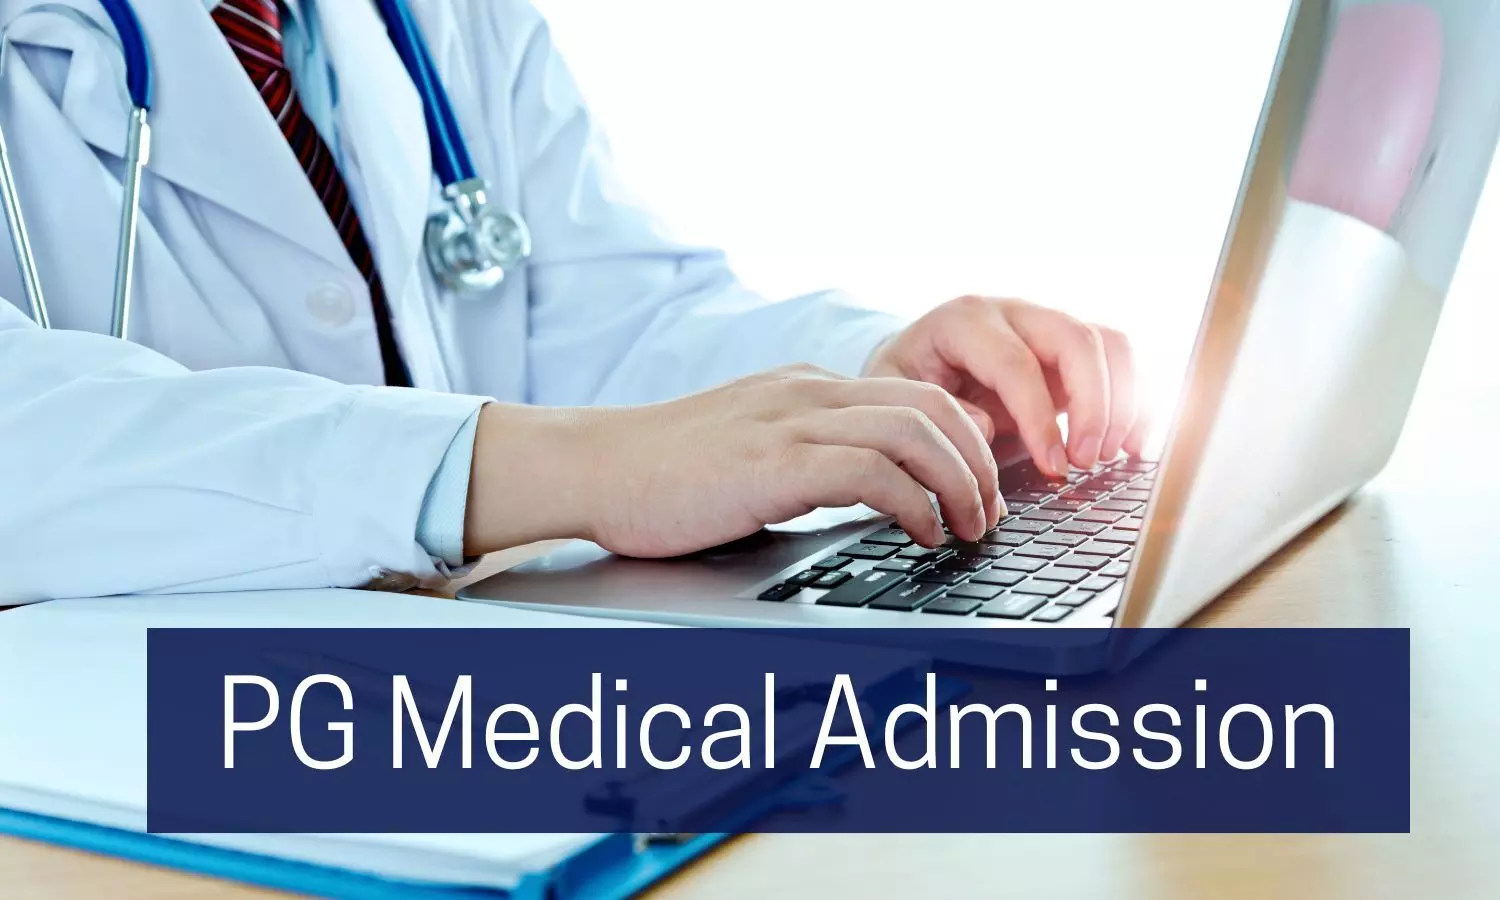 NTRUHS Informs on Web-Based Counselling PG Medical In-Service Admissions